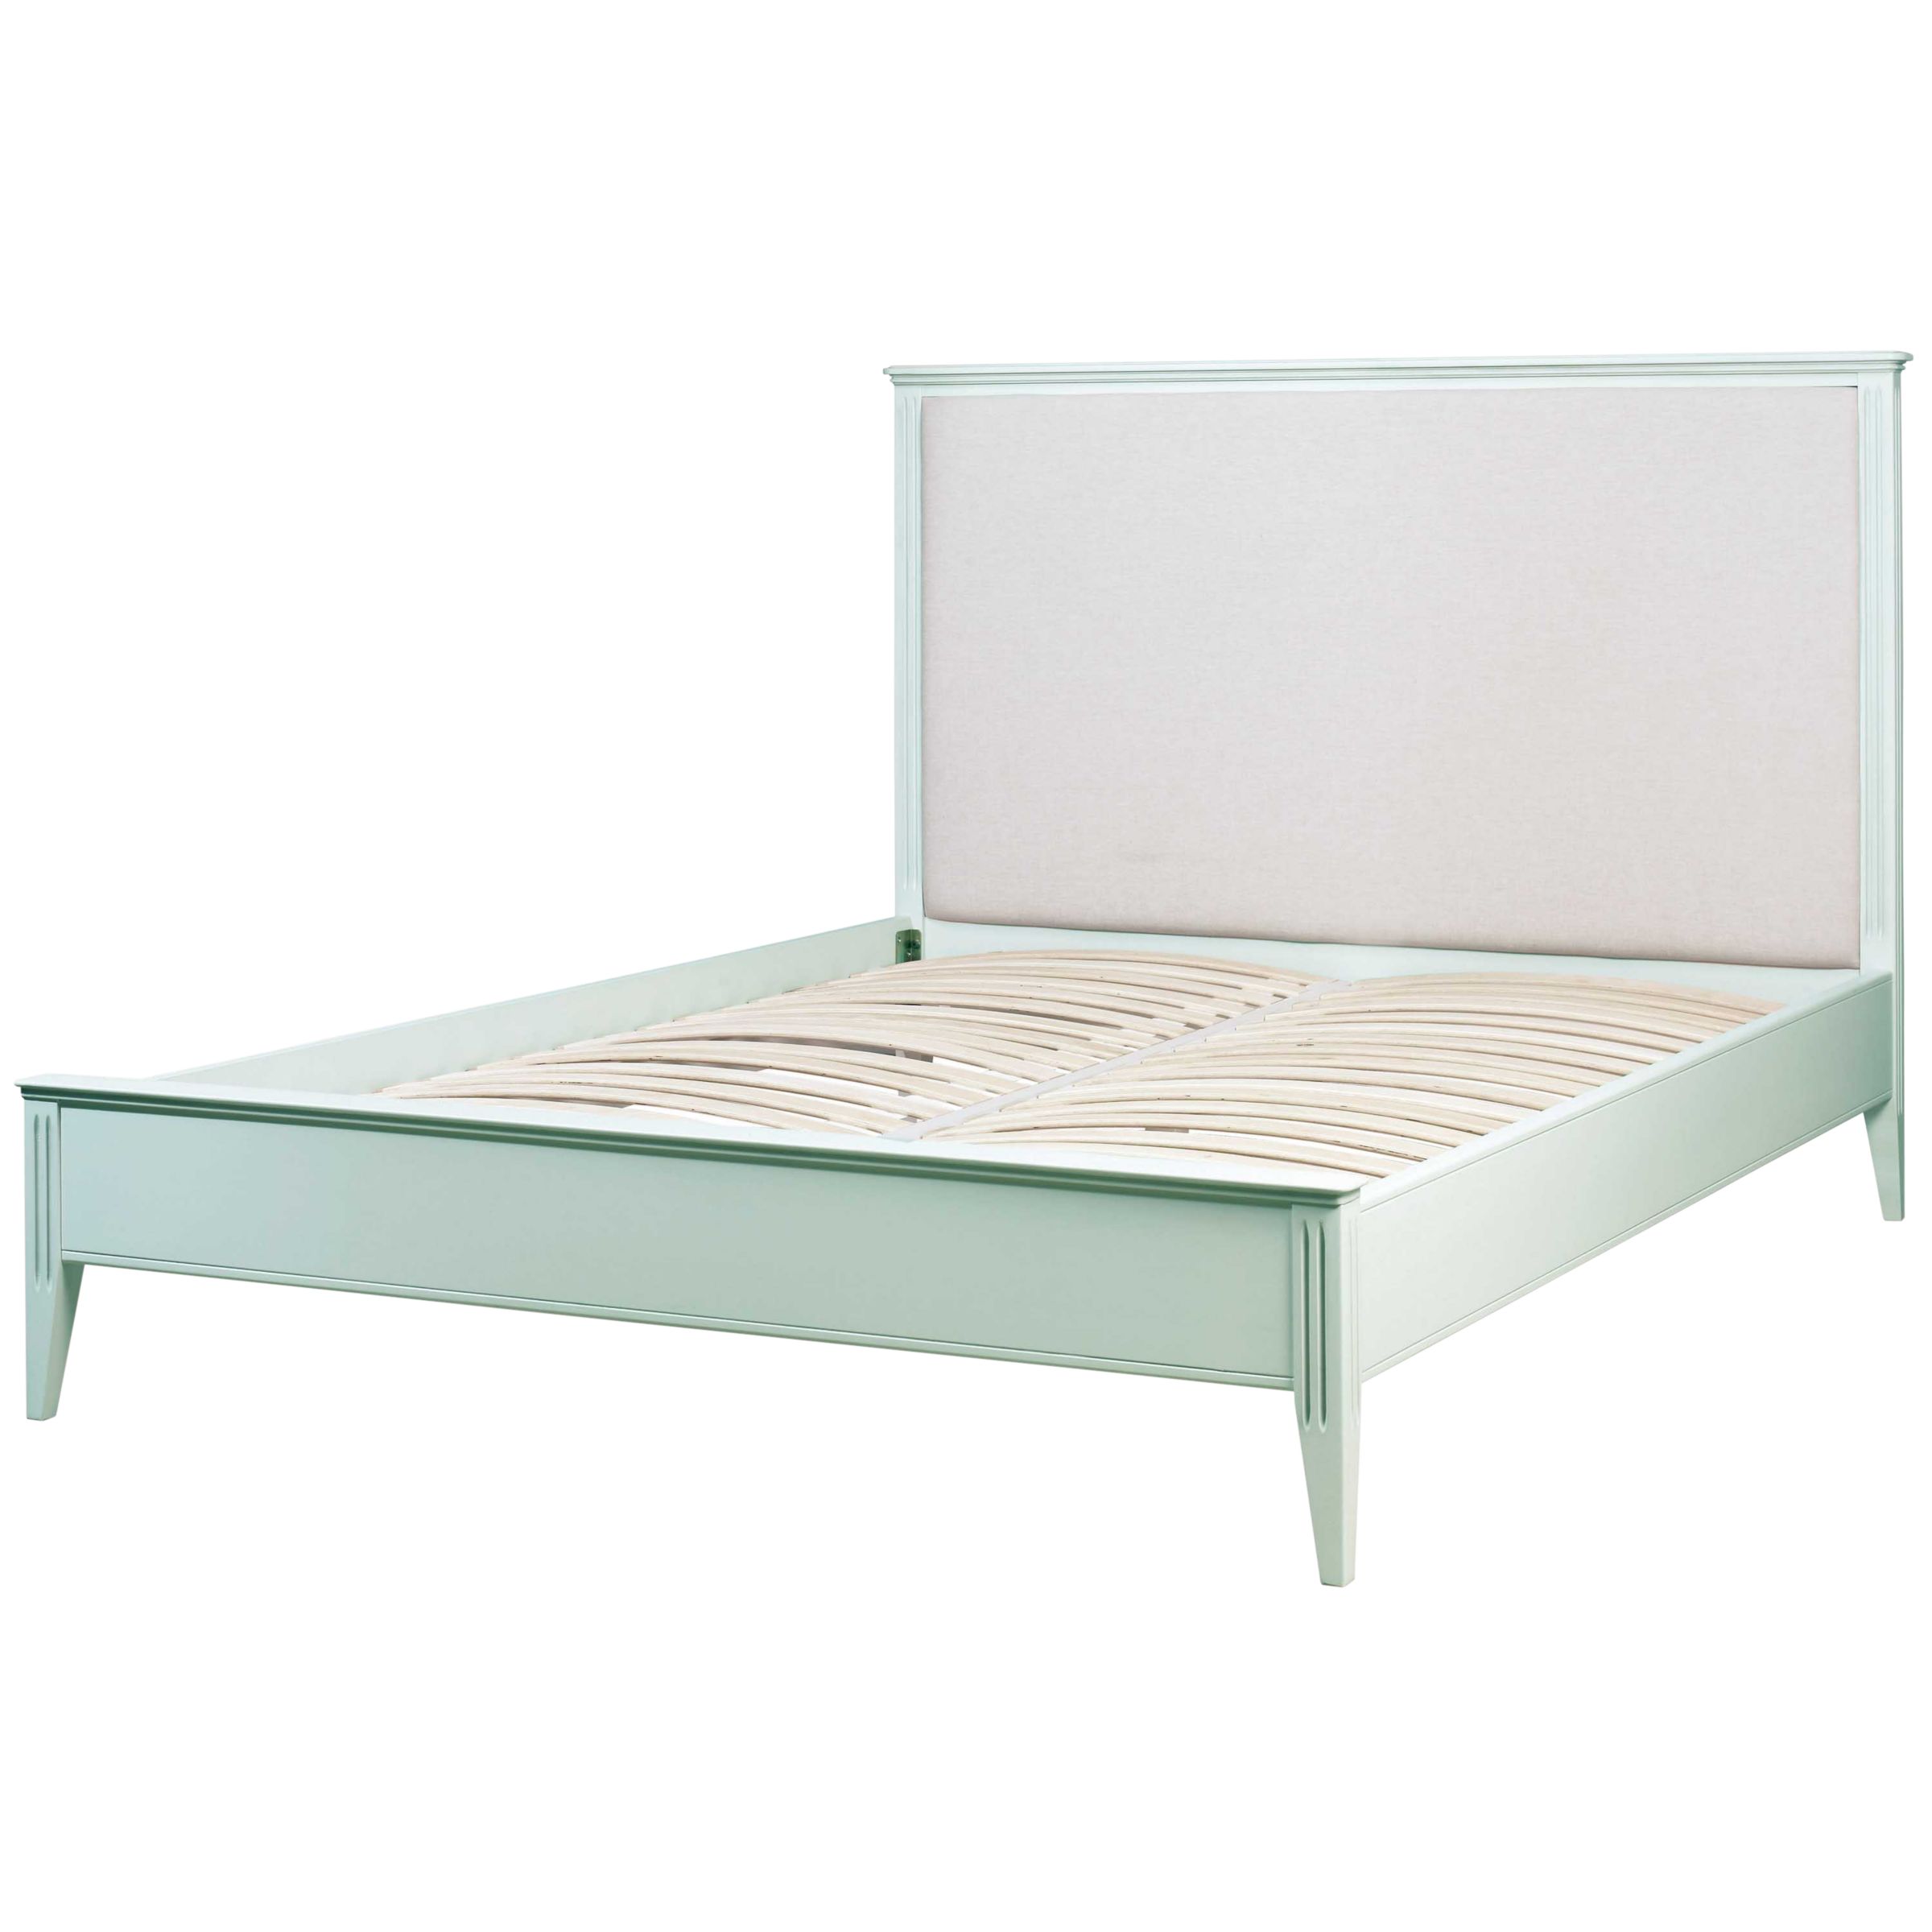 John Lewis Albany Low End Bedstead, Double, Duck Egg at John Lewis